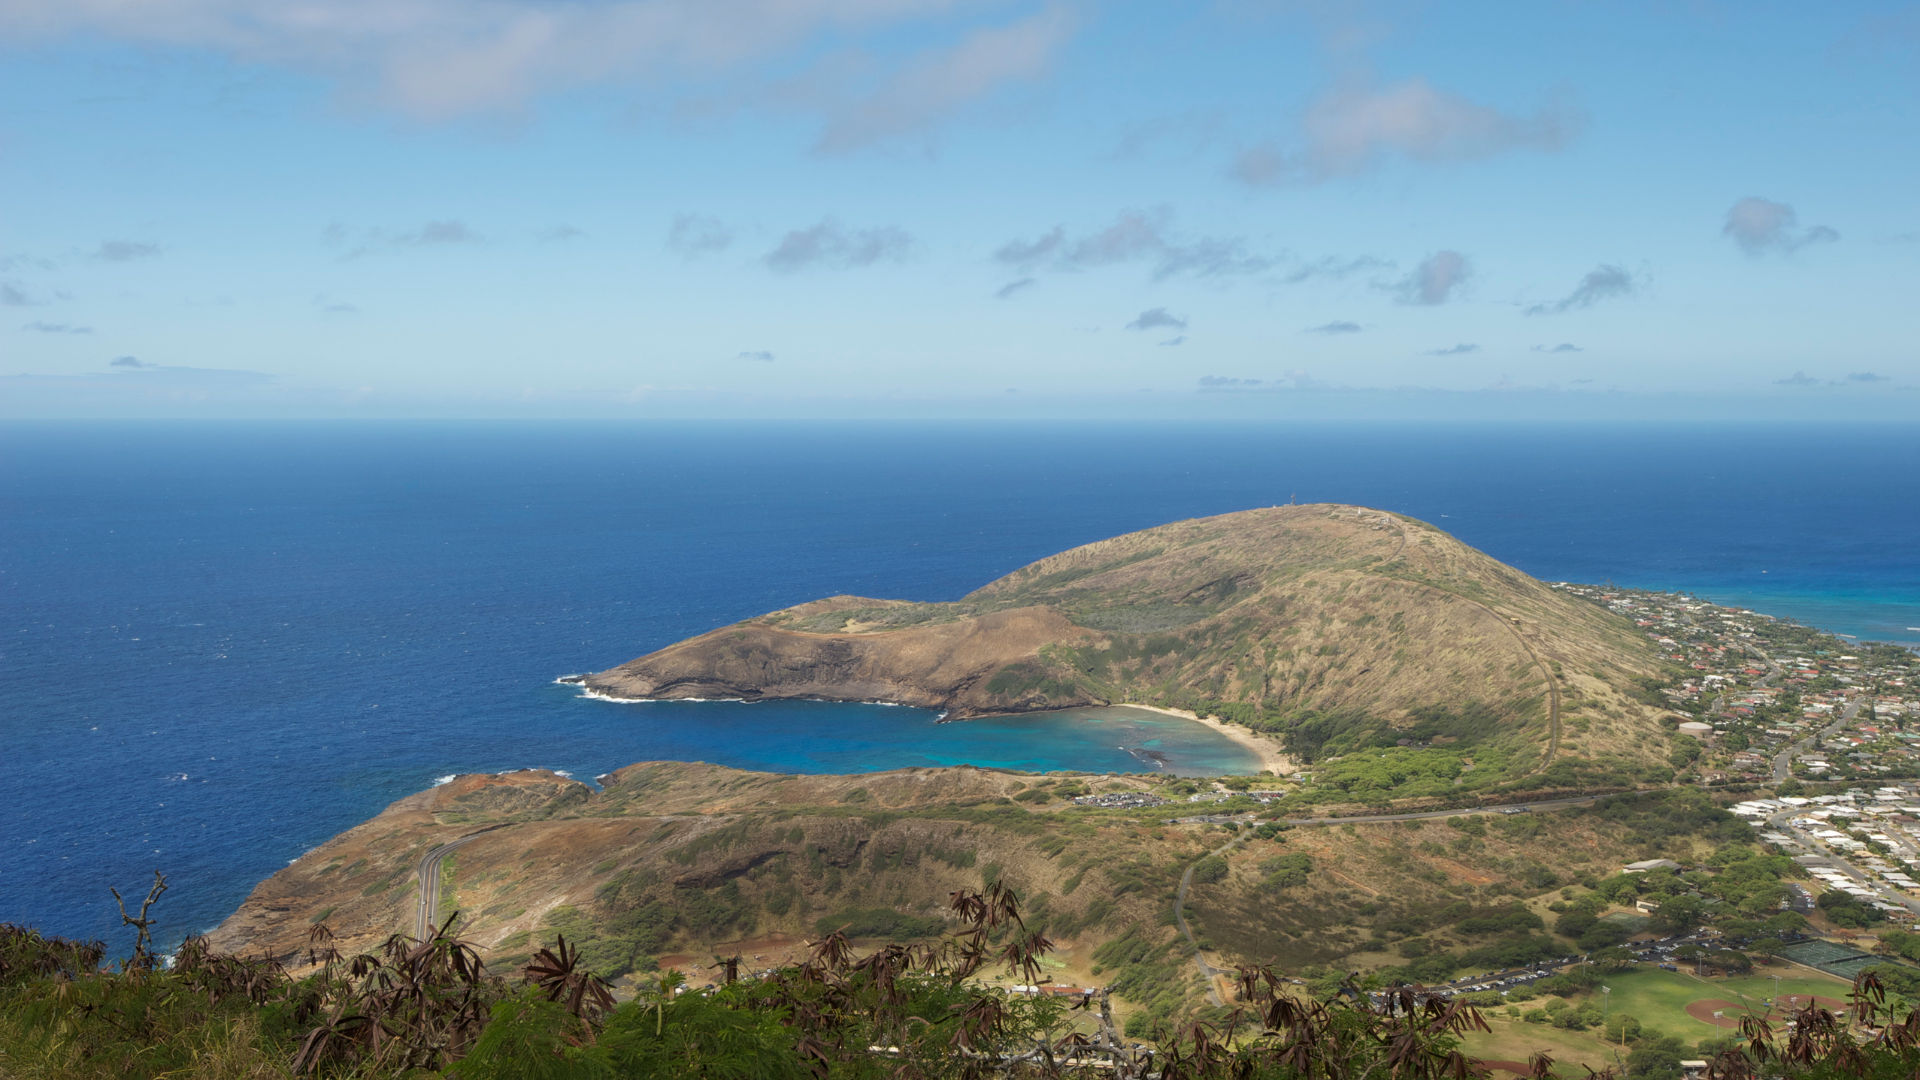 Hanauma Bay online reservation system to accept entry payments